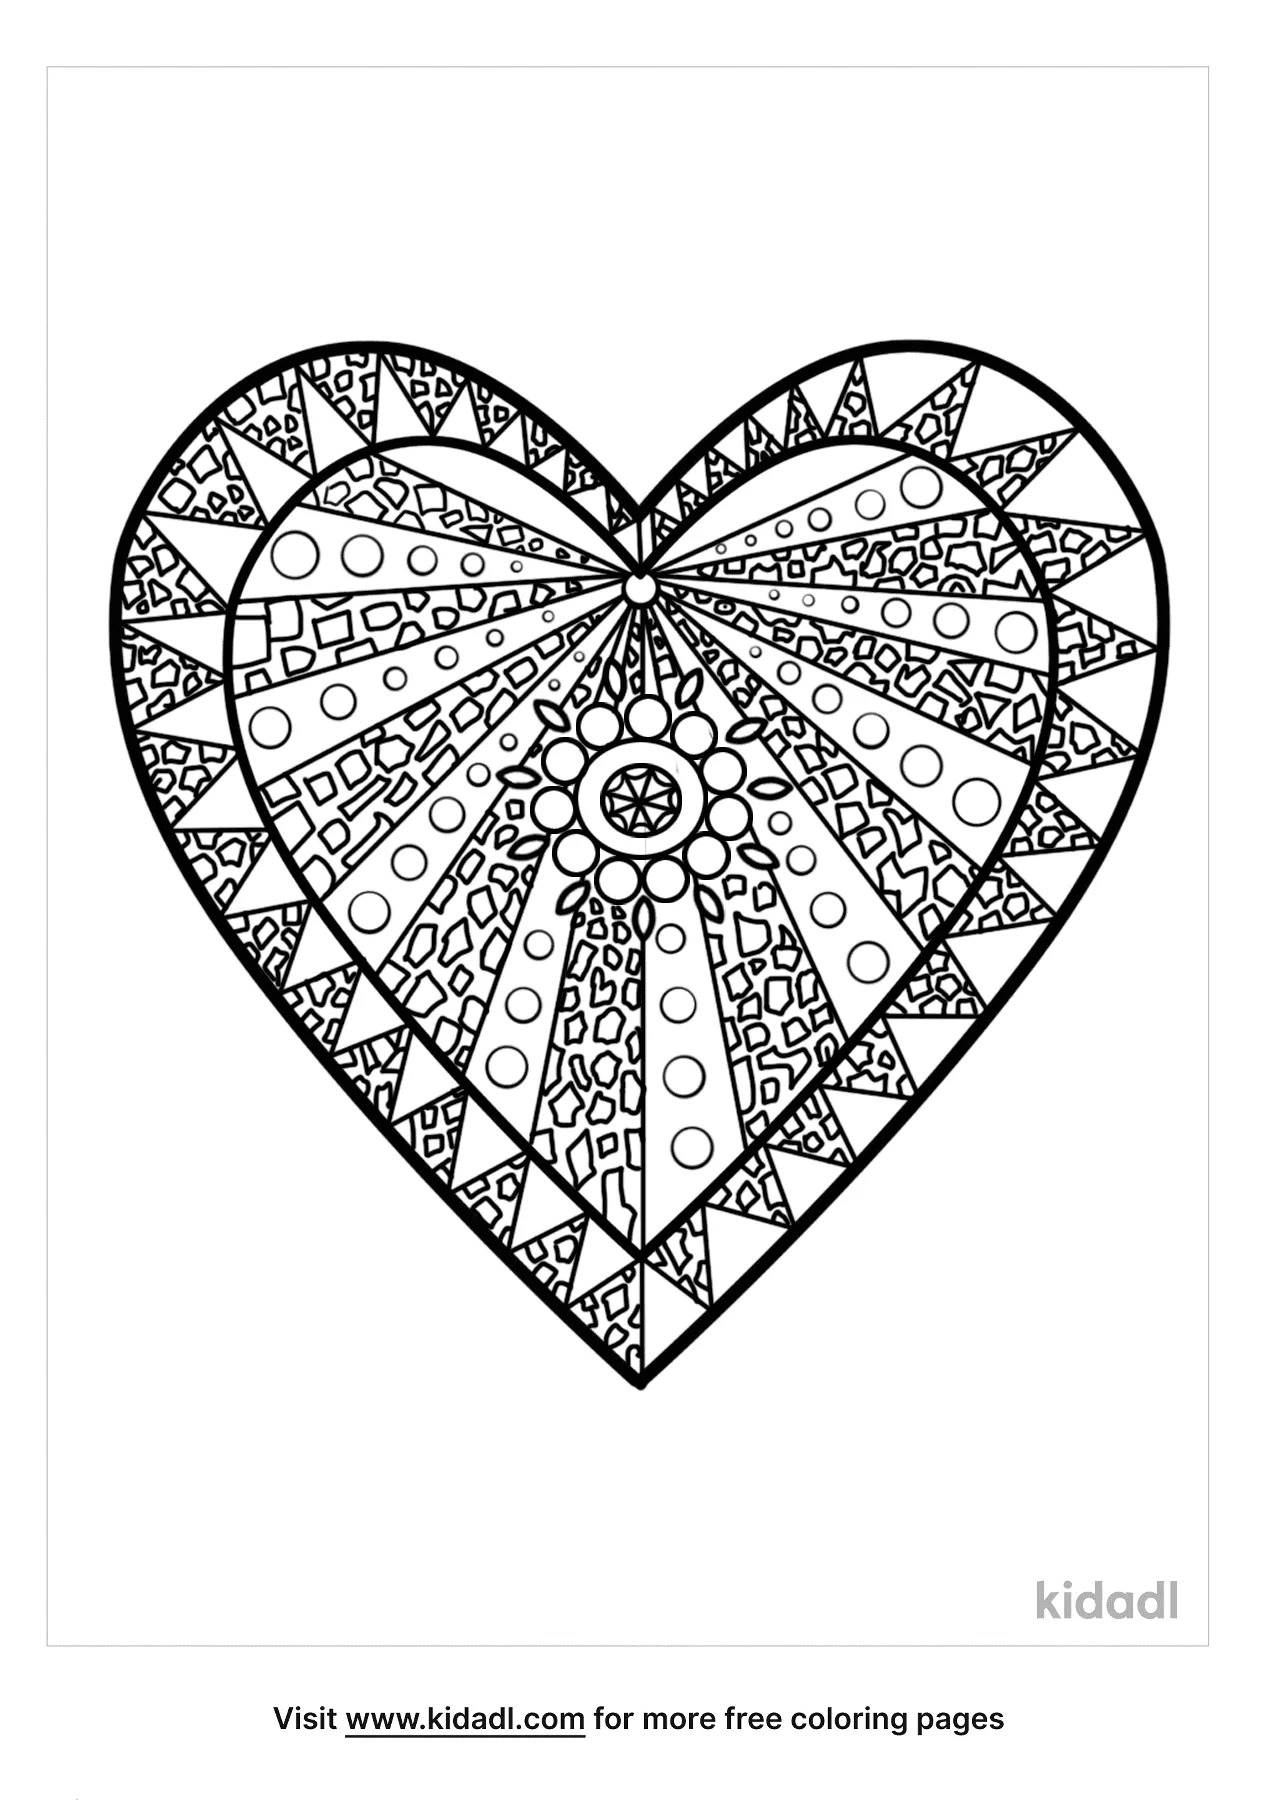 Free heart mosaic coloring page coloring page printables